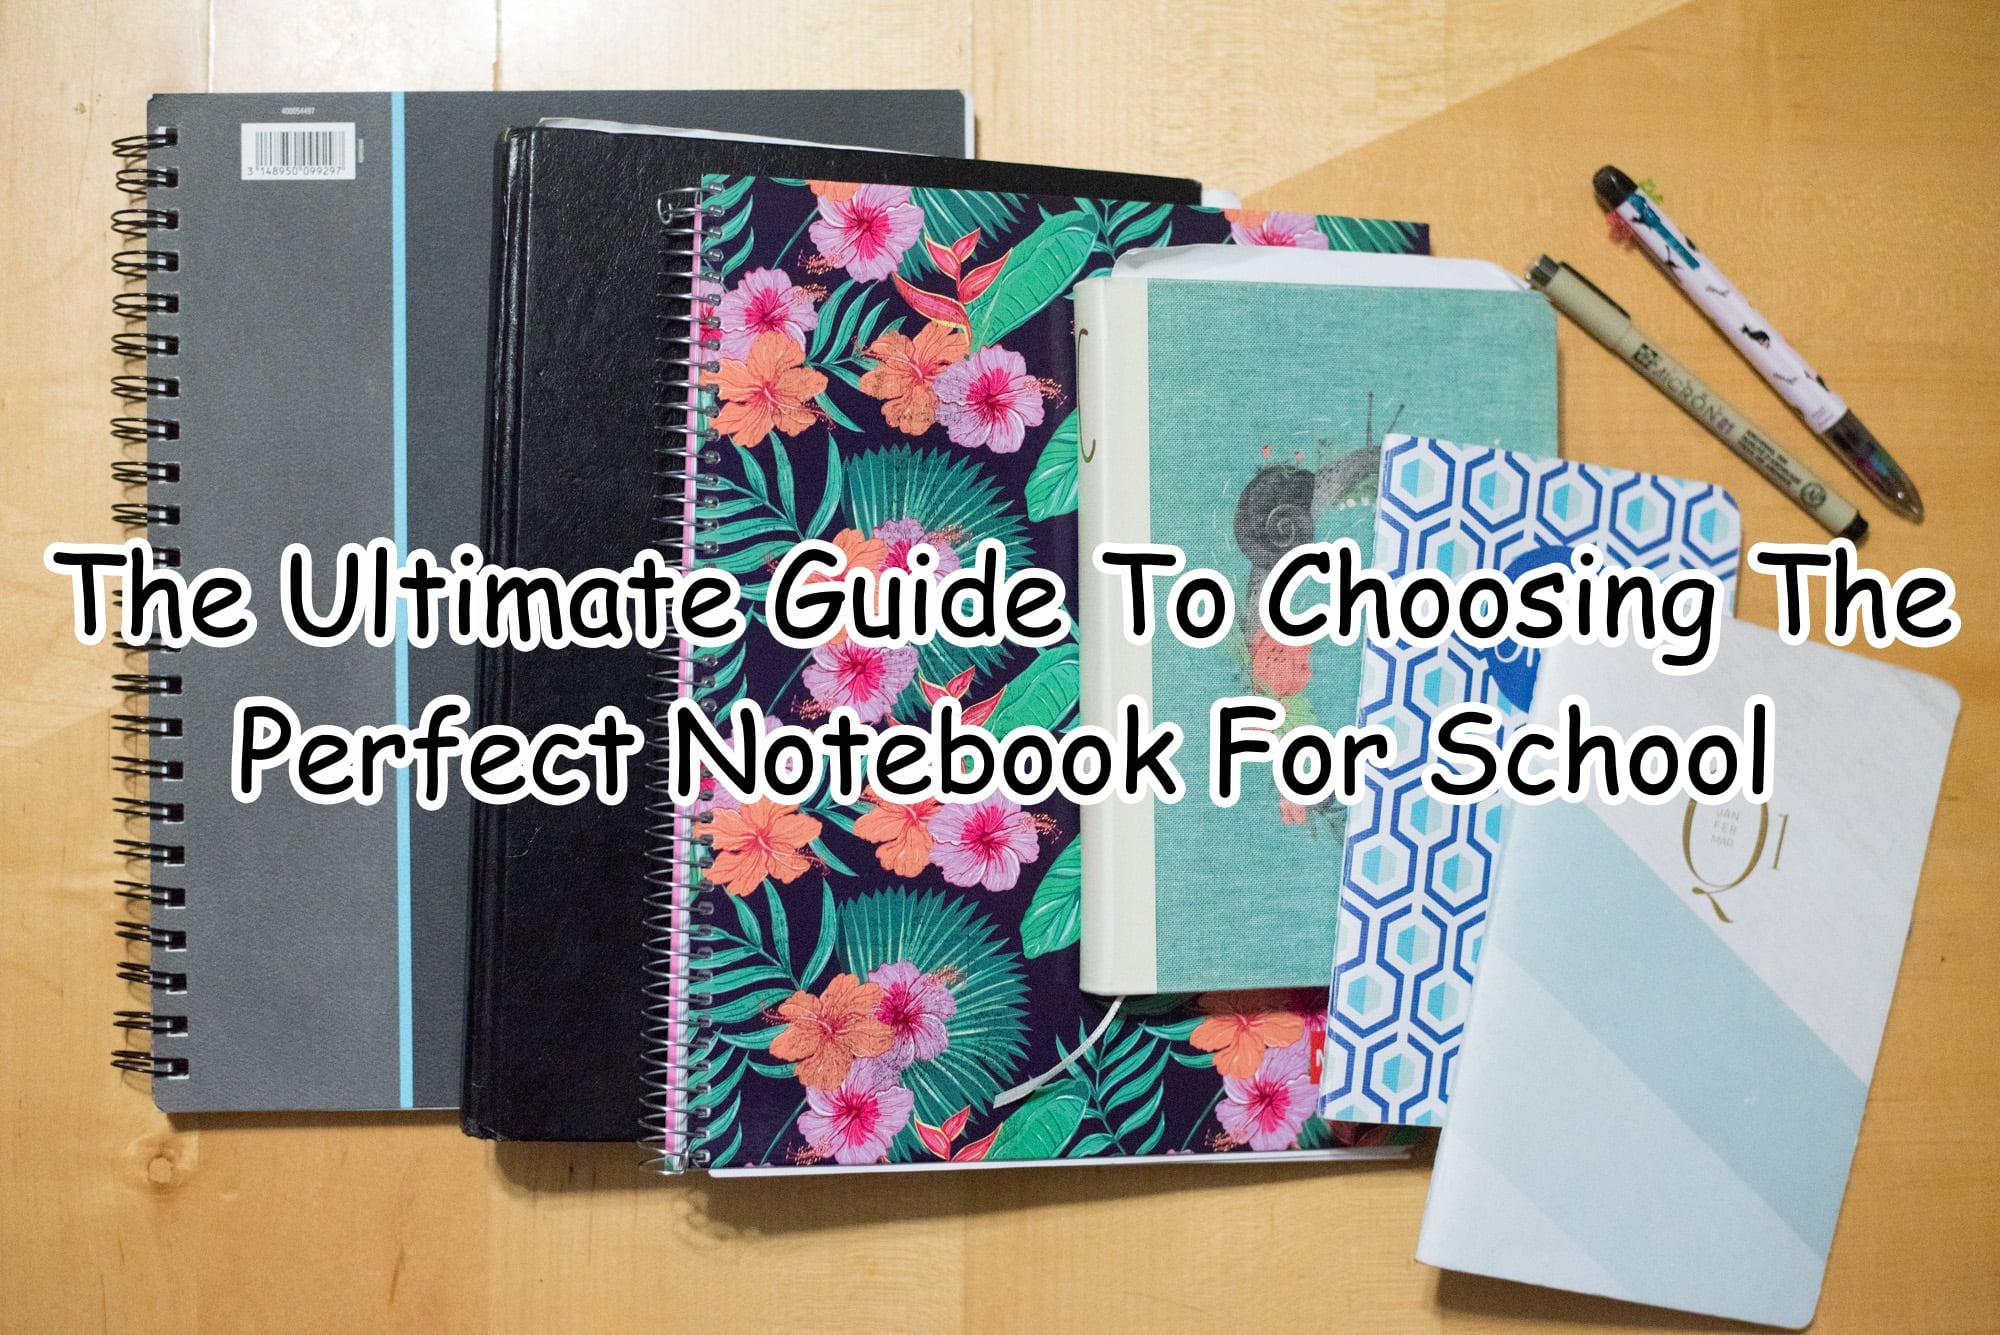 The Ultimate Guide To Choosing The Perfect Notebook For School